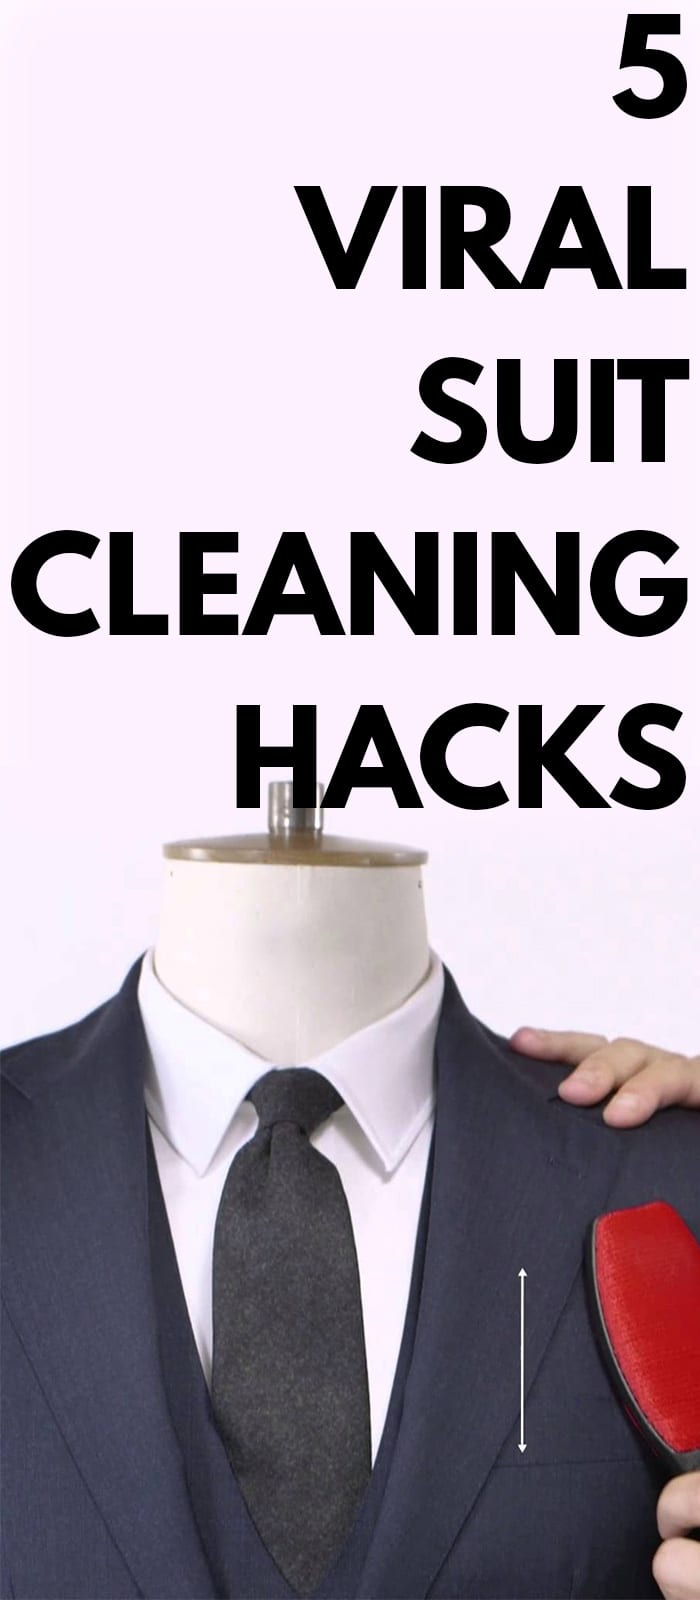 5 Viral Suit Cleaning Hacks!